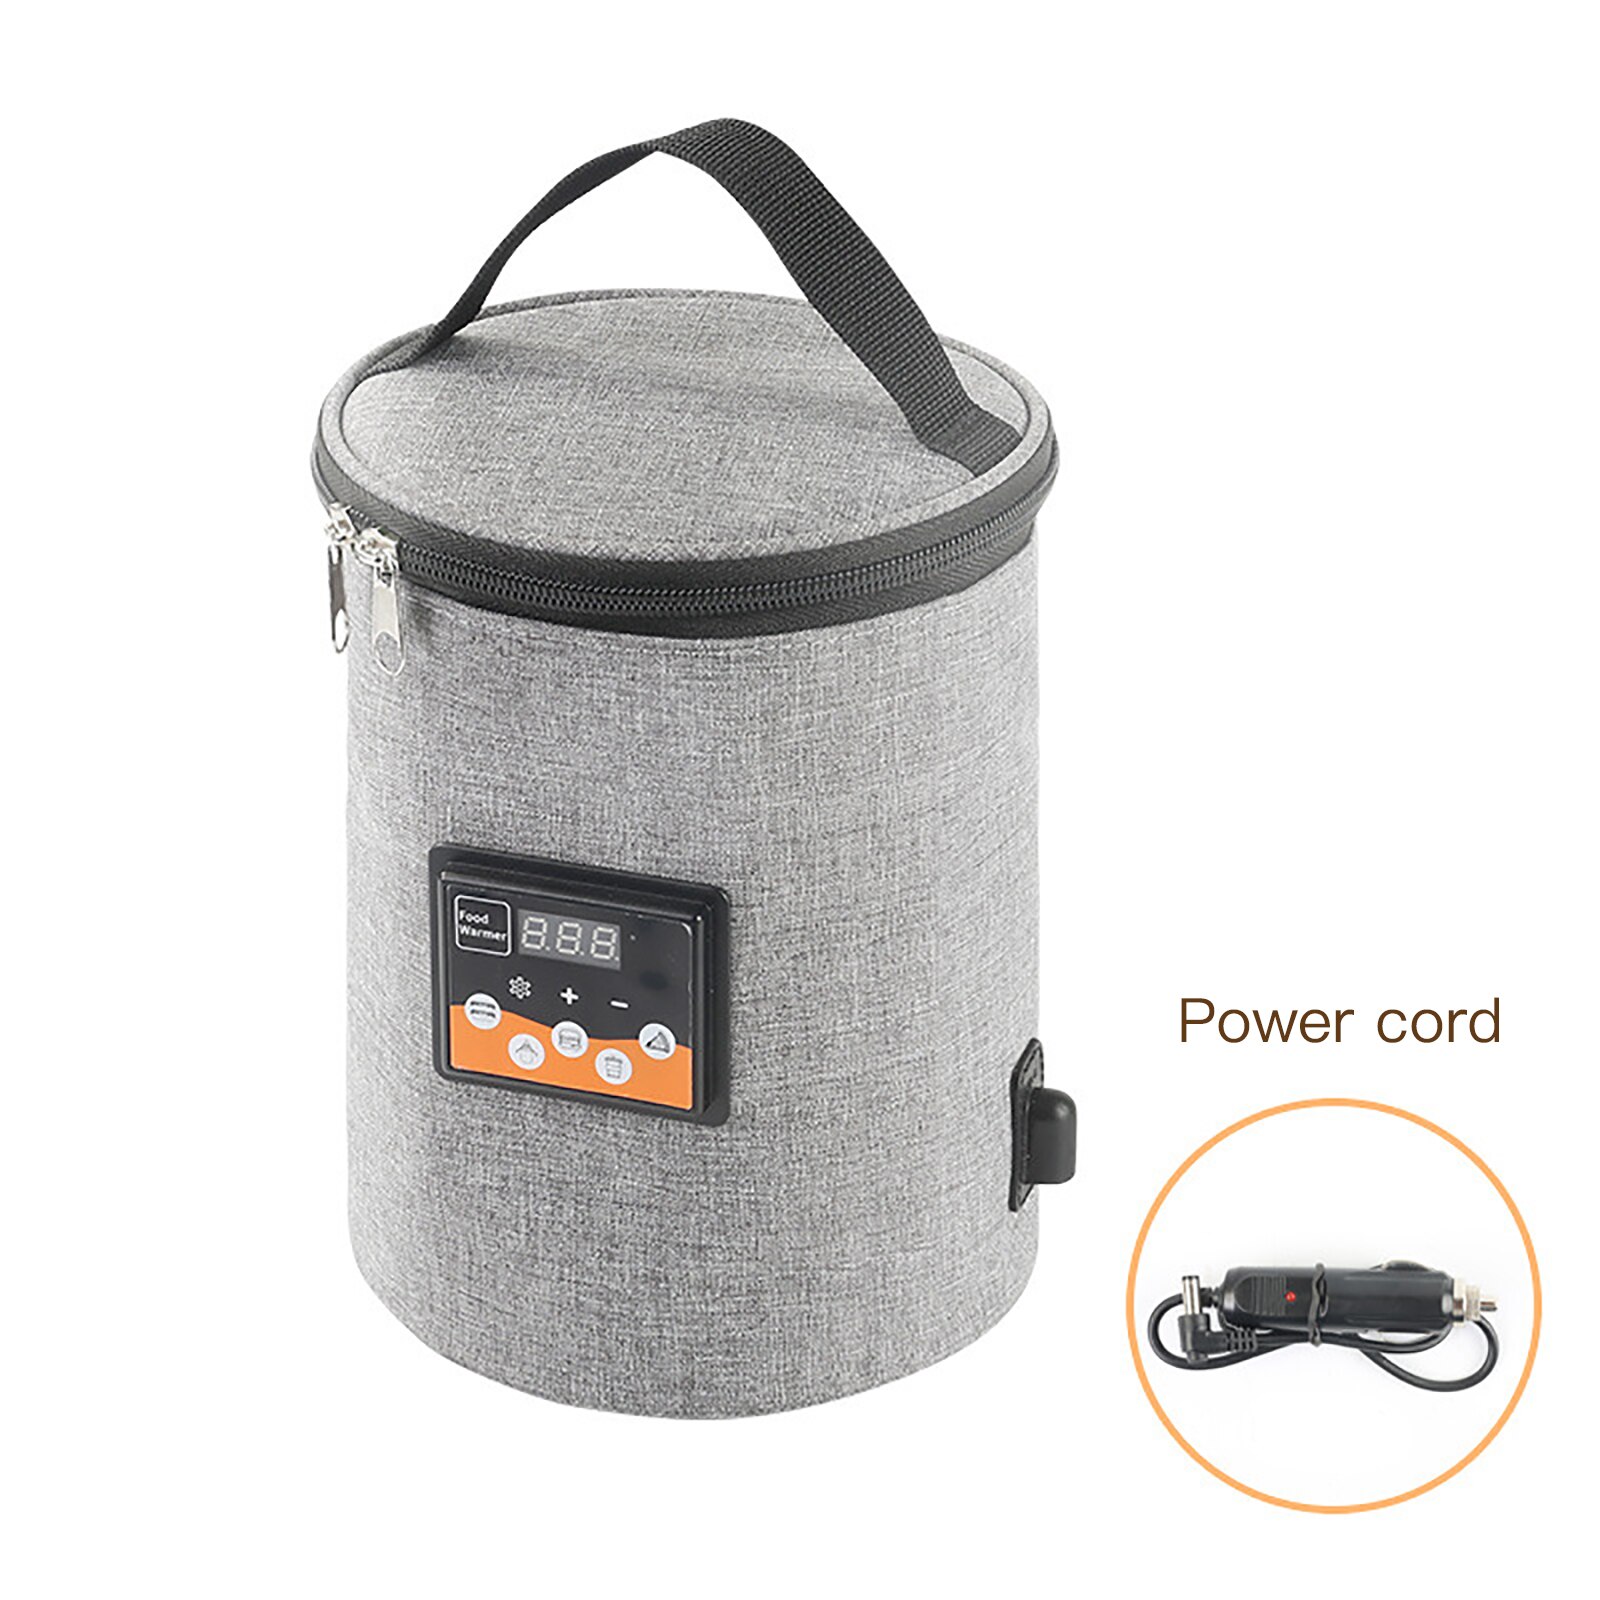 Draagbare Snel Zuigfles Eten Melk Travel Outdoor Cup Warmer Heater Dc 12V In Auto Baby Baby Fles warmer Heatered